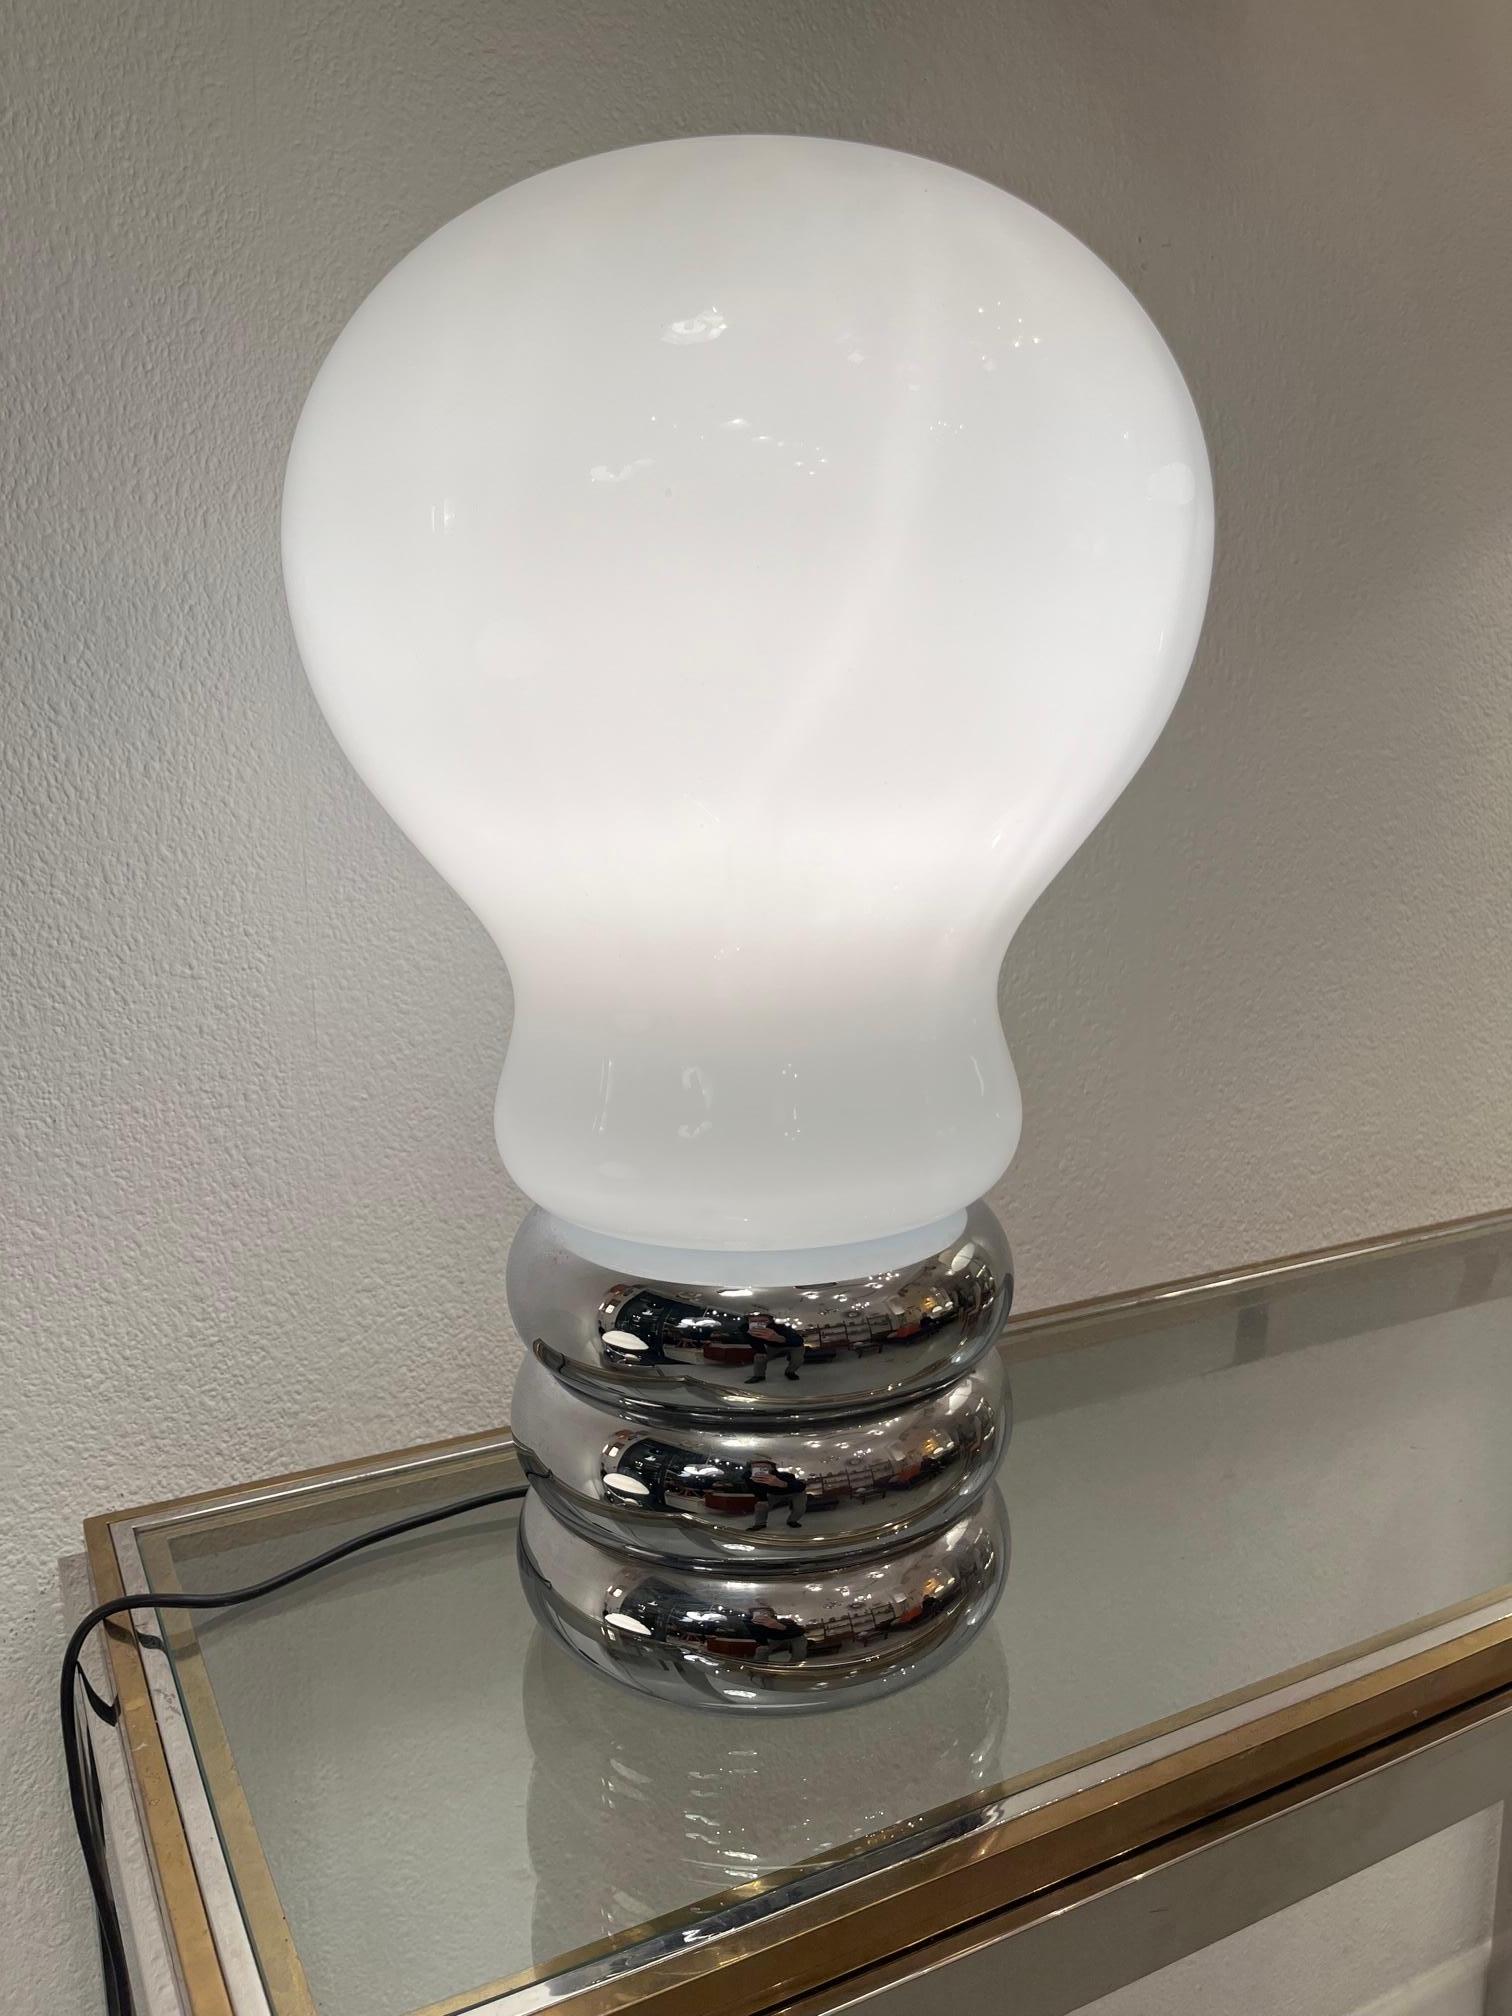 Vintage early Giant Bulb table lamp by Ingo Maurer produced by DesignM, Germany ca. 1966
White opal glass with chromed metal base. Manufacturer label. Original electrification.
Very good condition.
H 55 x D 33 cm
Not anymore in production.
 